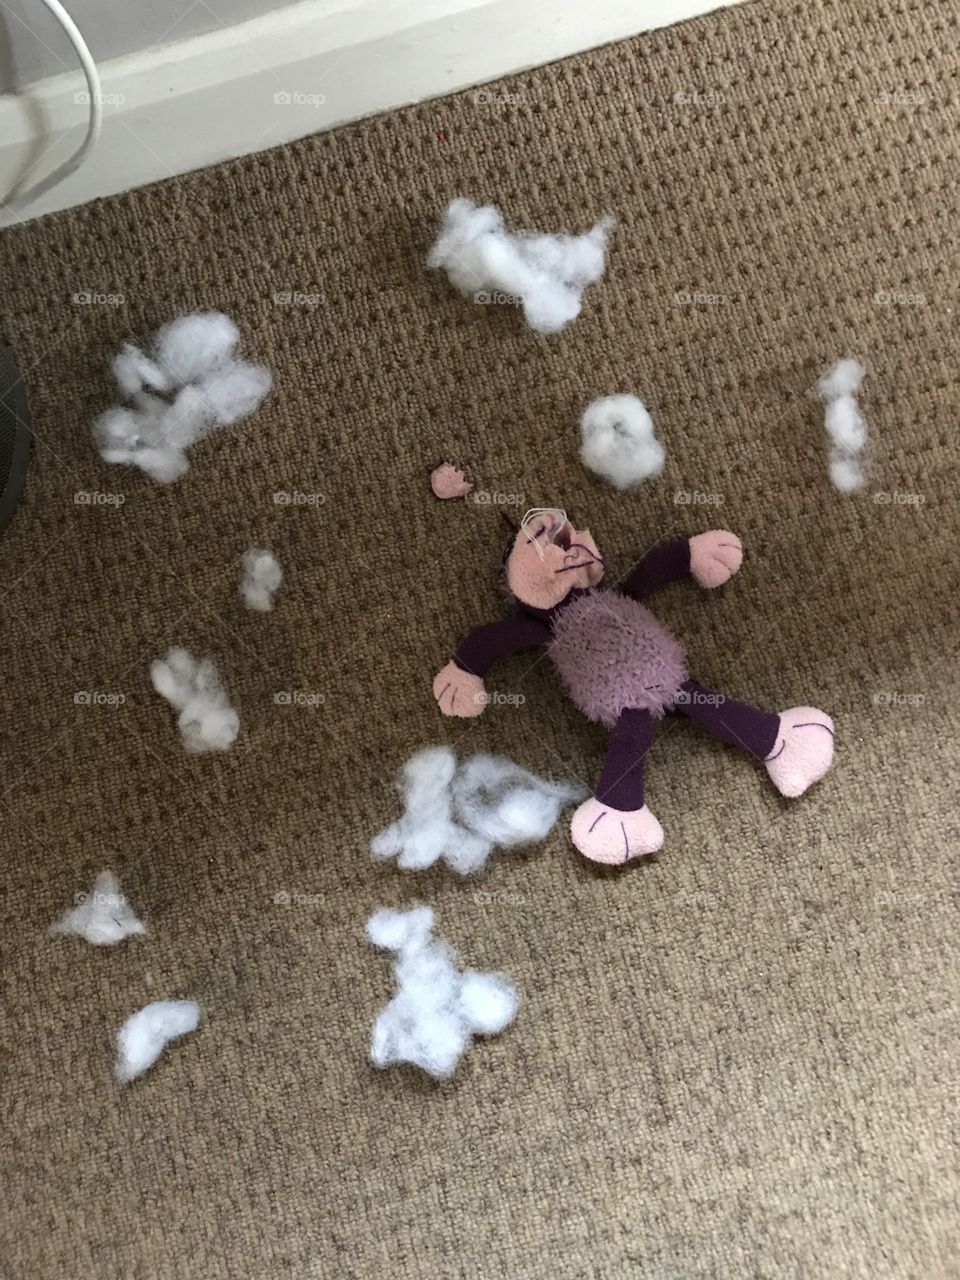 Crime scene after puppy attack